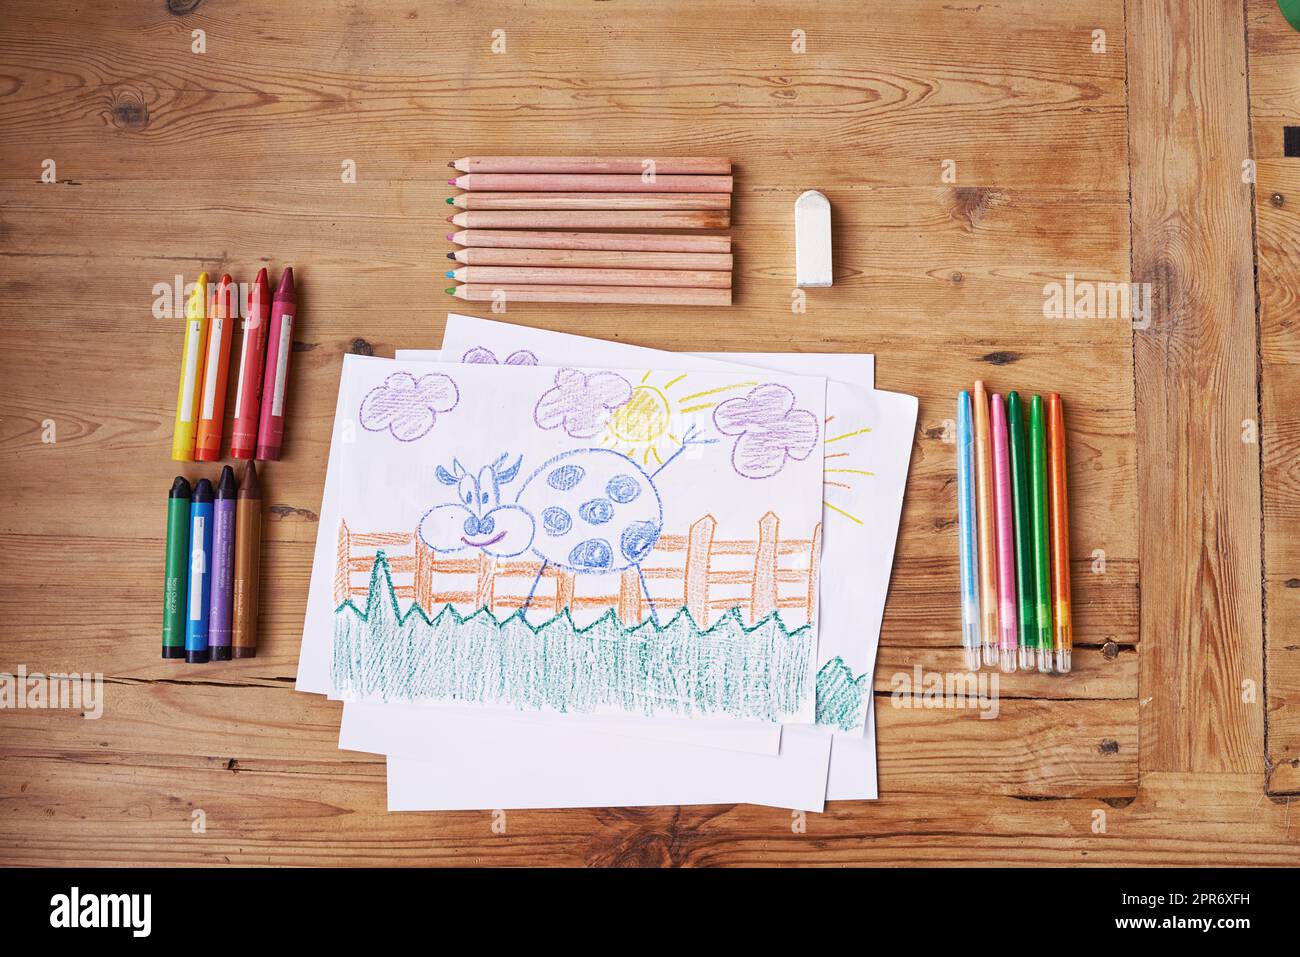 Creativity is intelligence having fun. Shot of a drawing with painting supplies and pencils on a wooden table. Stock Photo